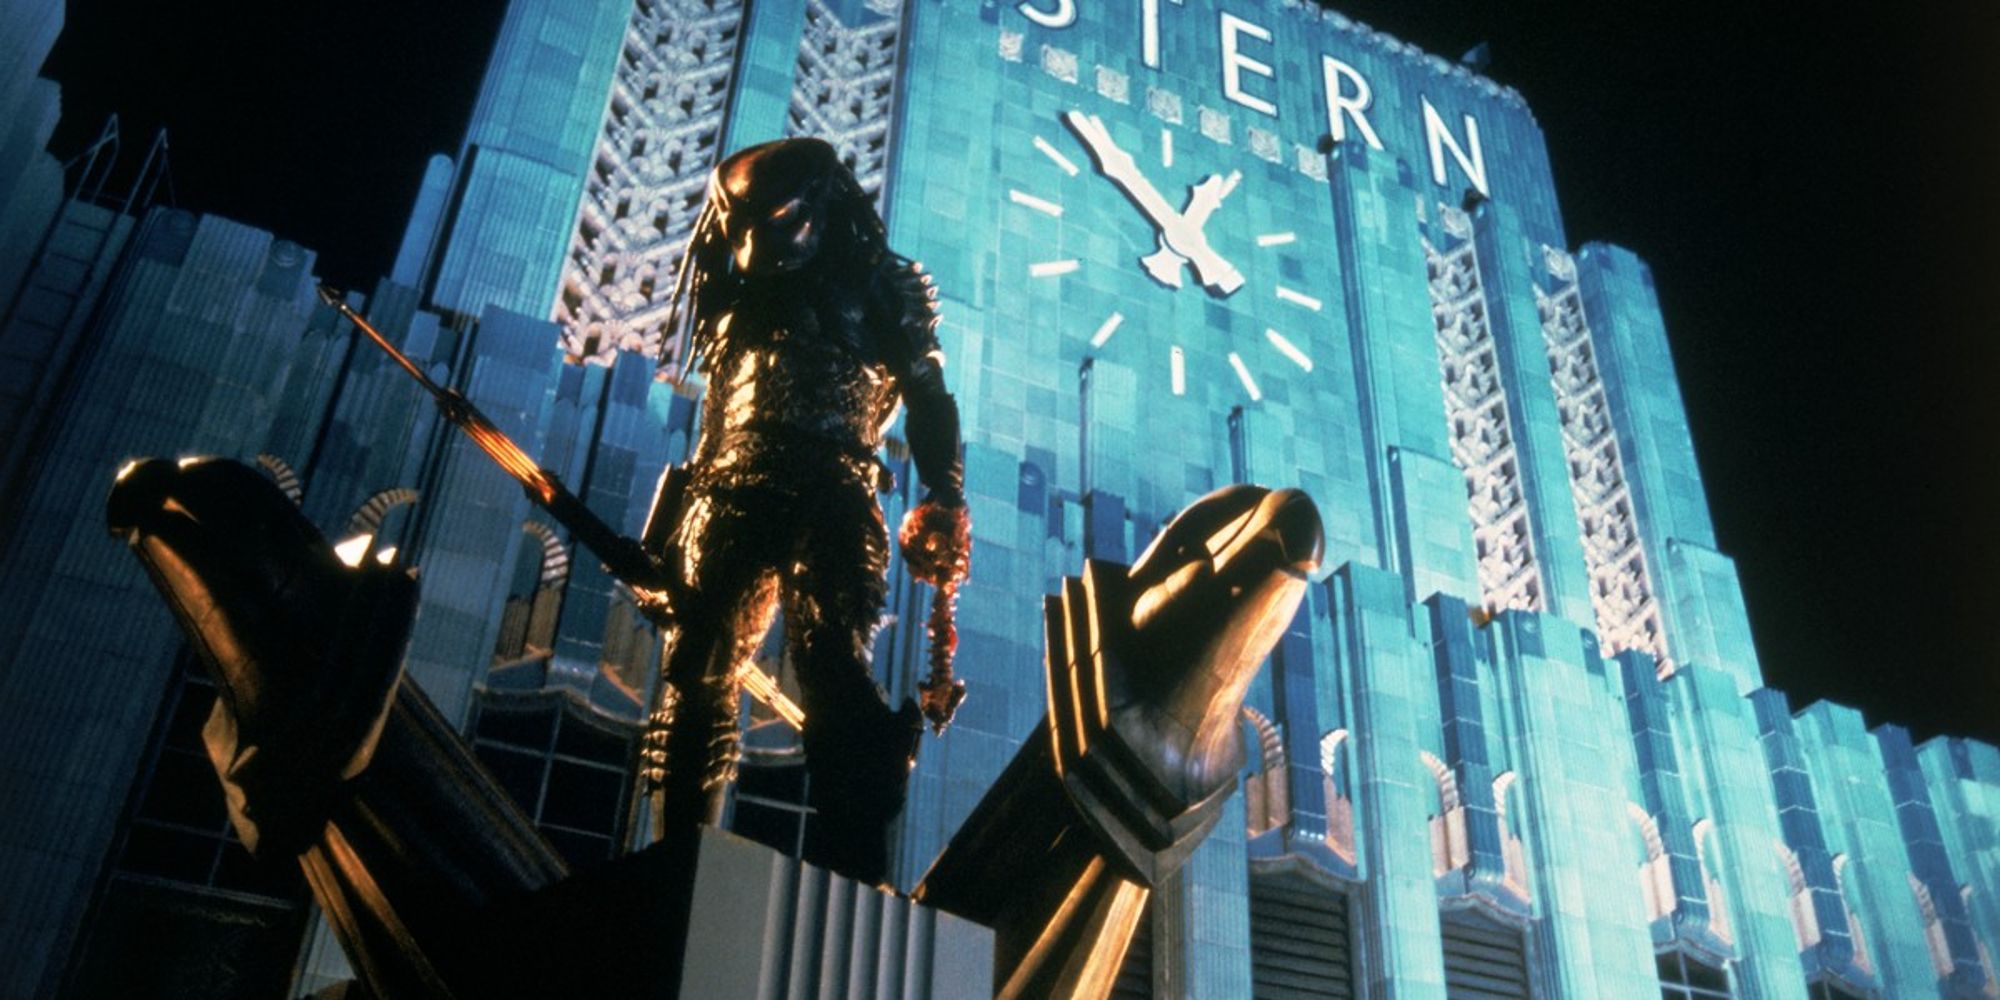 The City Hunter perched on a rooftop in Predator 2